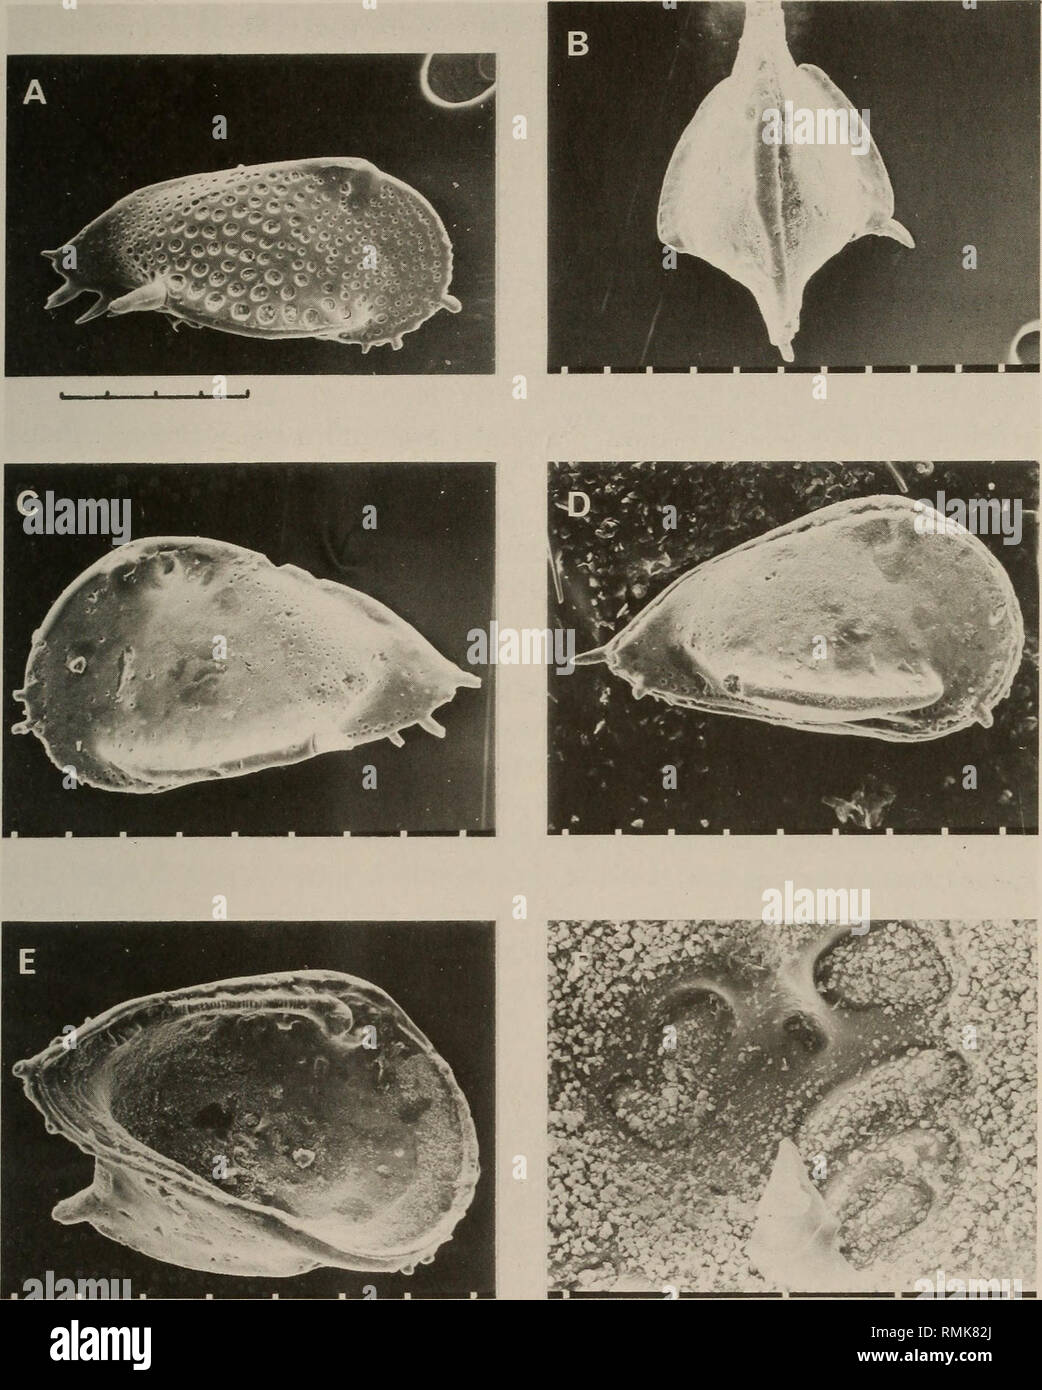 . Annals of the South African Museum = Annale van die Suid-Afrikaanse Museum. Natural history. CAMPANIAN AND MAASTRICHTIAN OSTRACODA 75. Fig. 35. A. Brachycythere sicarius Dingle, 1980, SAM-K5606, BH9 89,0 m, RV, Campanian II. B-F. Pterygocythere lanceolata sp. nov. B. SAM-K5731, locality 20-1/2, Mfolozi River, dorsal view carapace, Maastrichtian I. C. Holotype, SAM-K5730, locality 20-1/3, Mfolozi River, LV, Maastrichtian I. D. SAM-K5732, locality 20-1/3, Mfolozi River, RV, Maastrich- tian I. E. SAM-K5733, locality 20-1/2, Mfolozi River, internal LV, Maastrichtian I. F. SAM-K5734, locality 20- Stock Photo